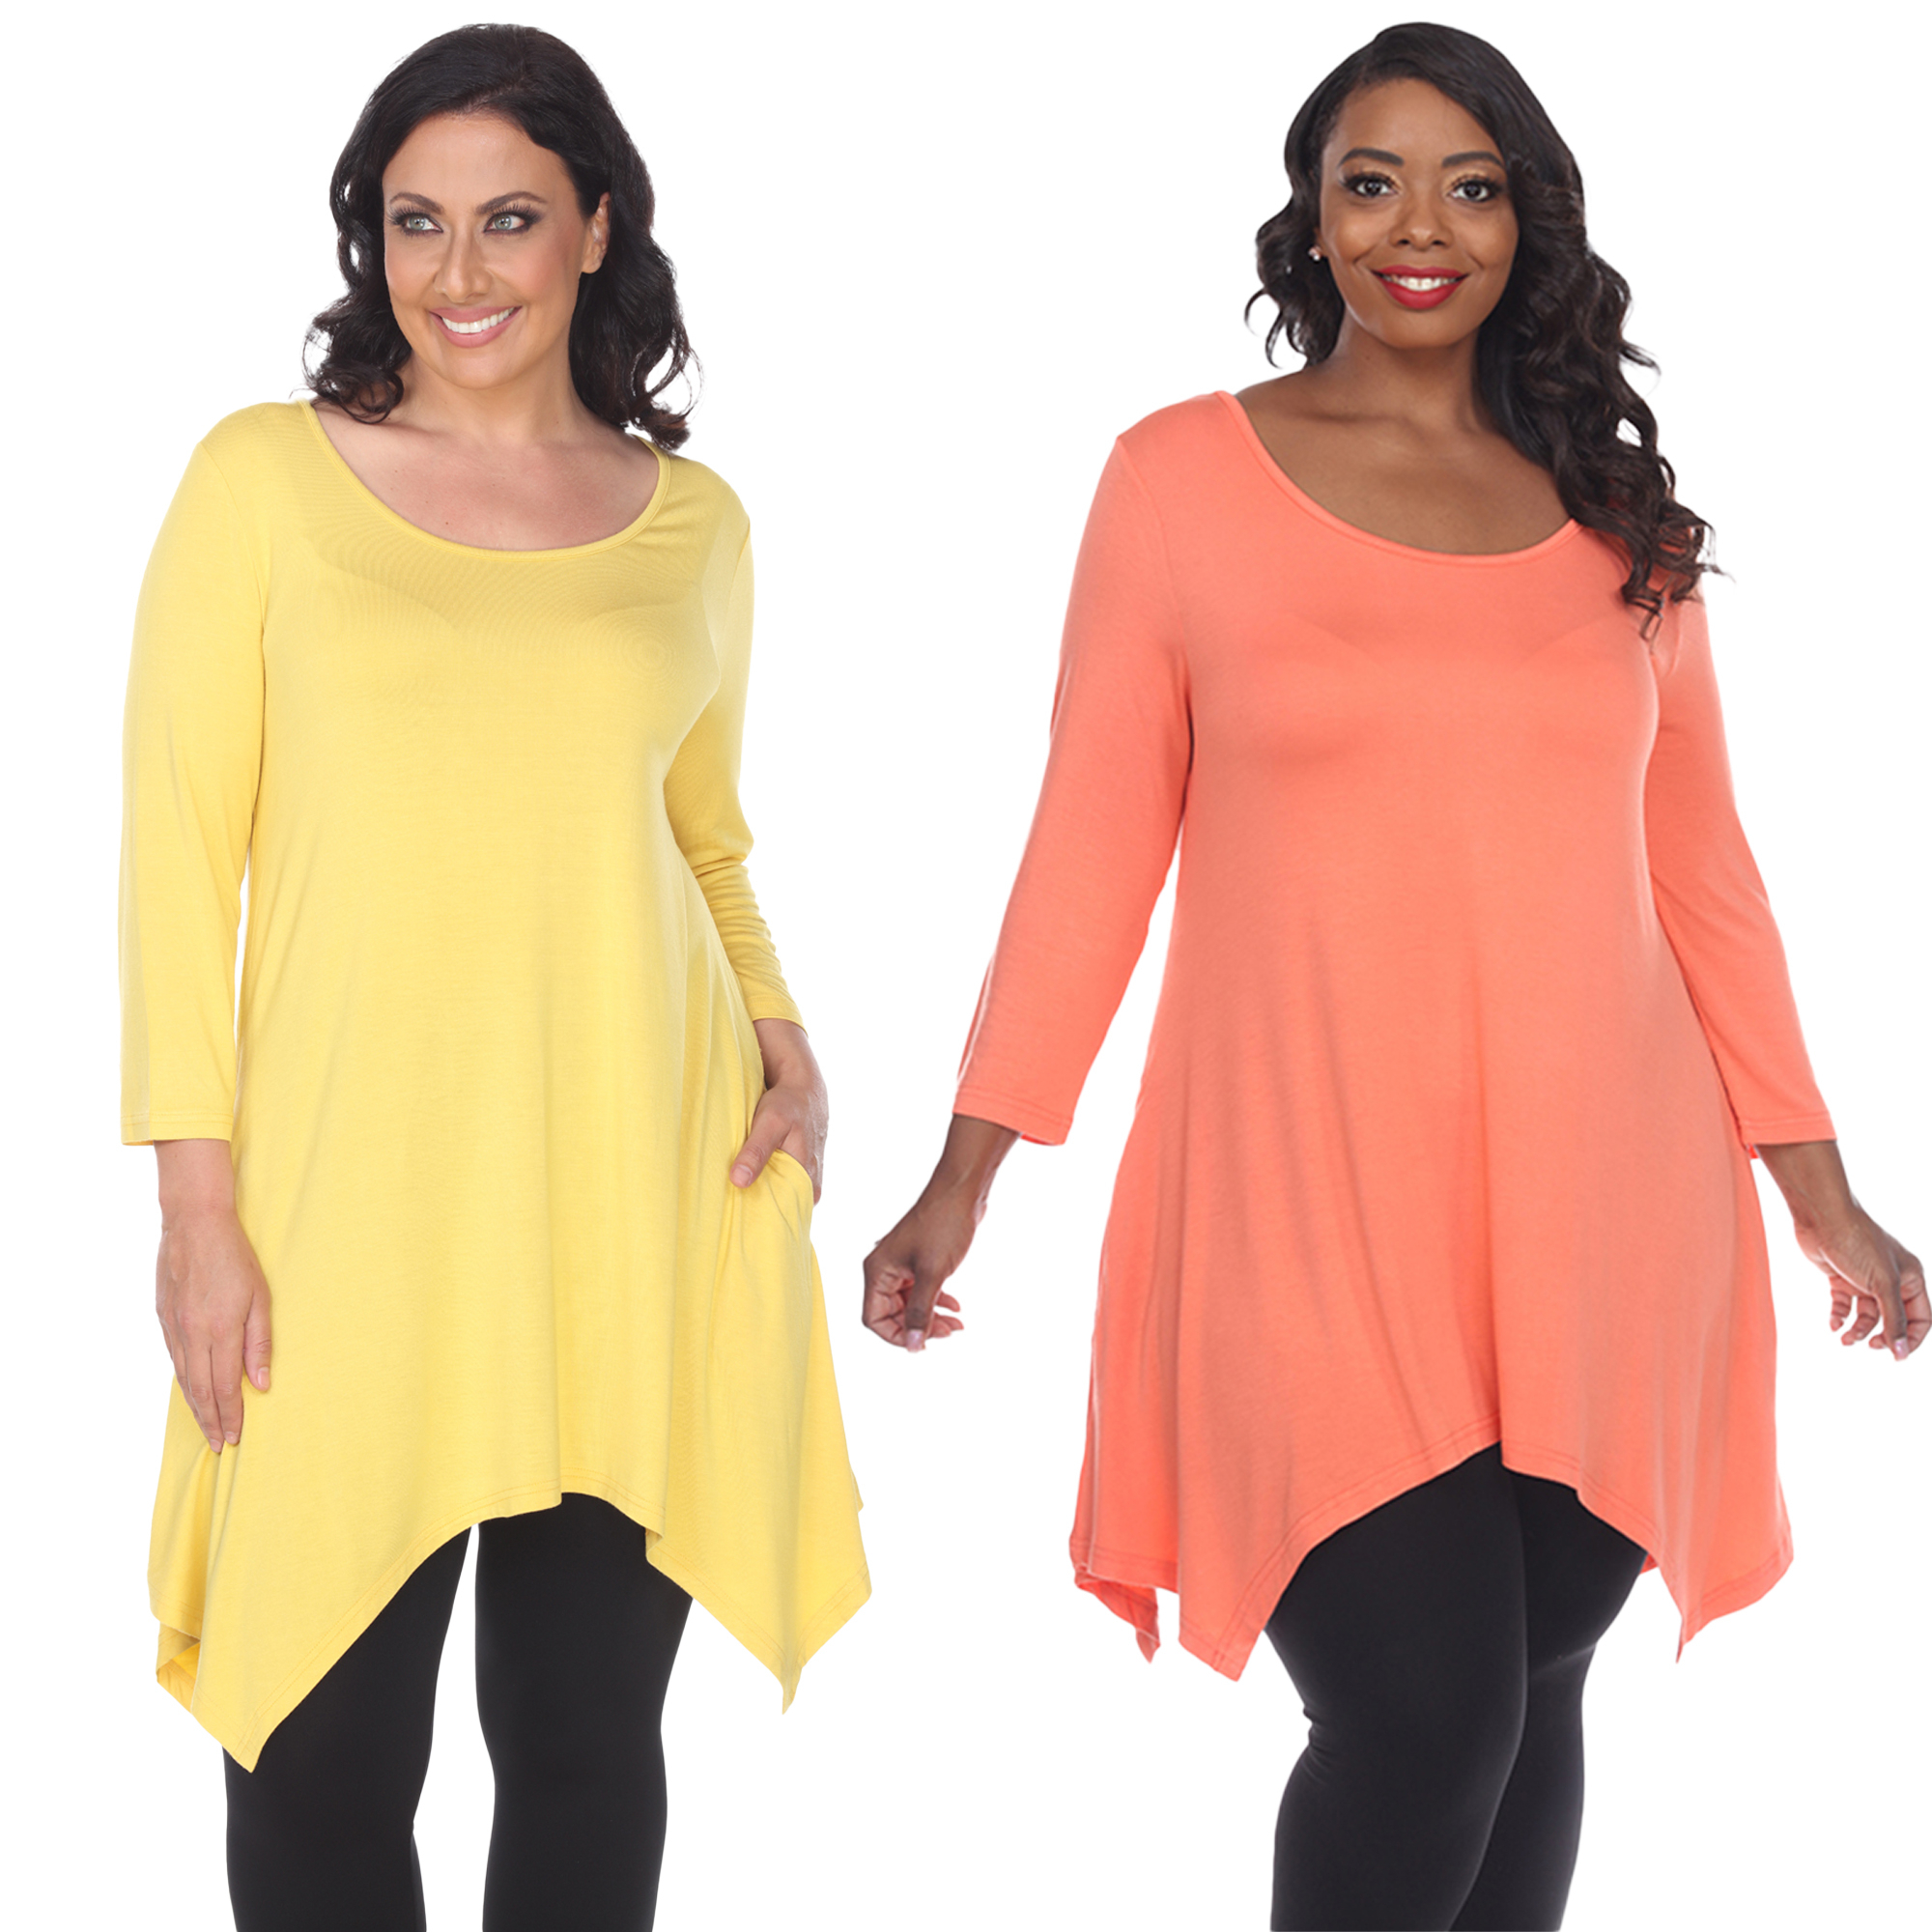 White Mark Women's Pack Of 2 Yellow Tunic Top - Yellow, Coral, 2X